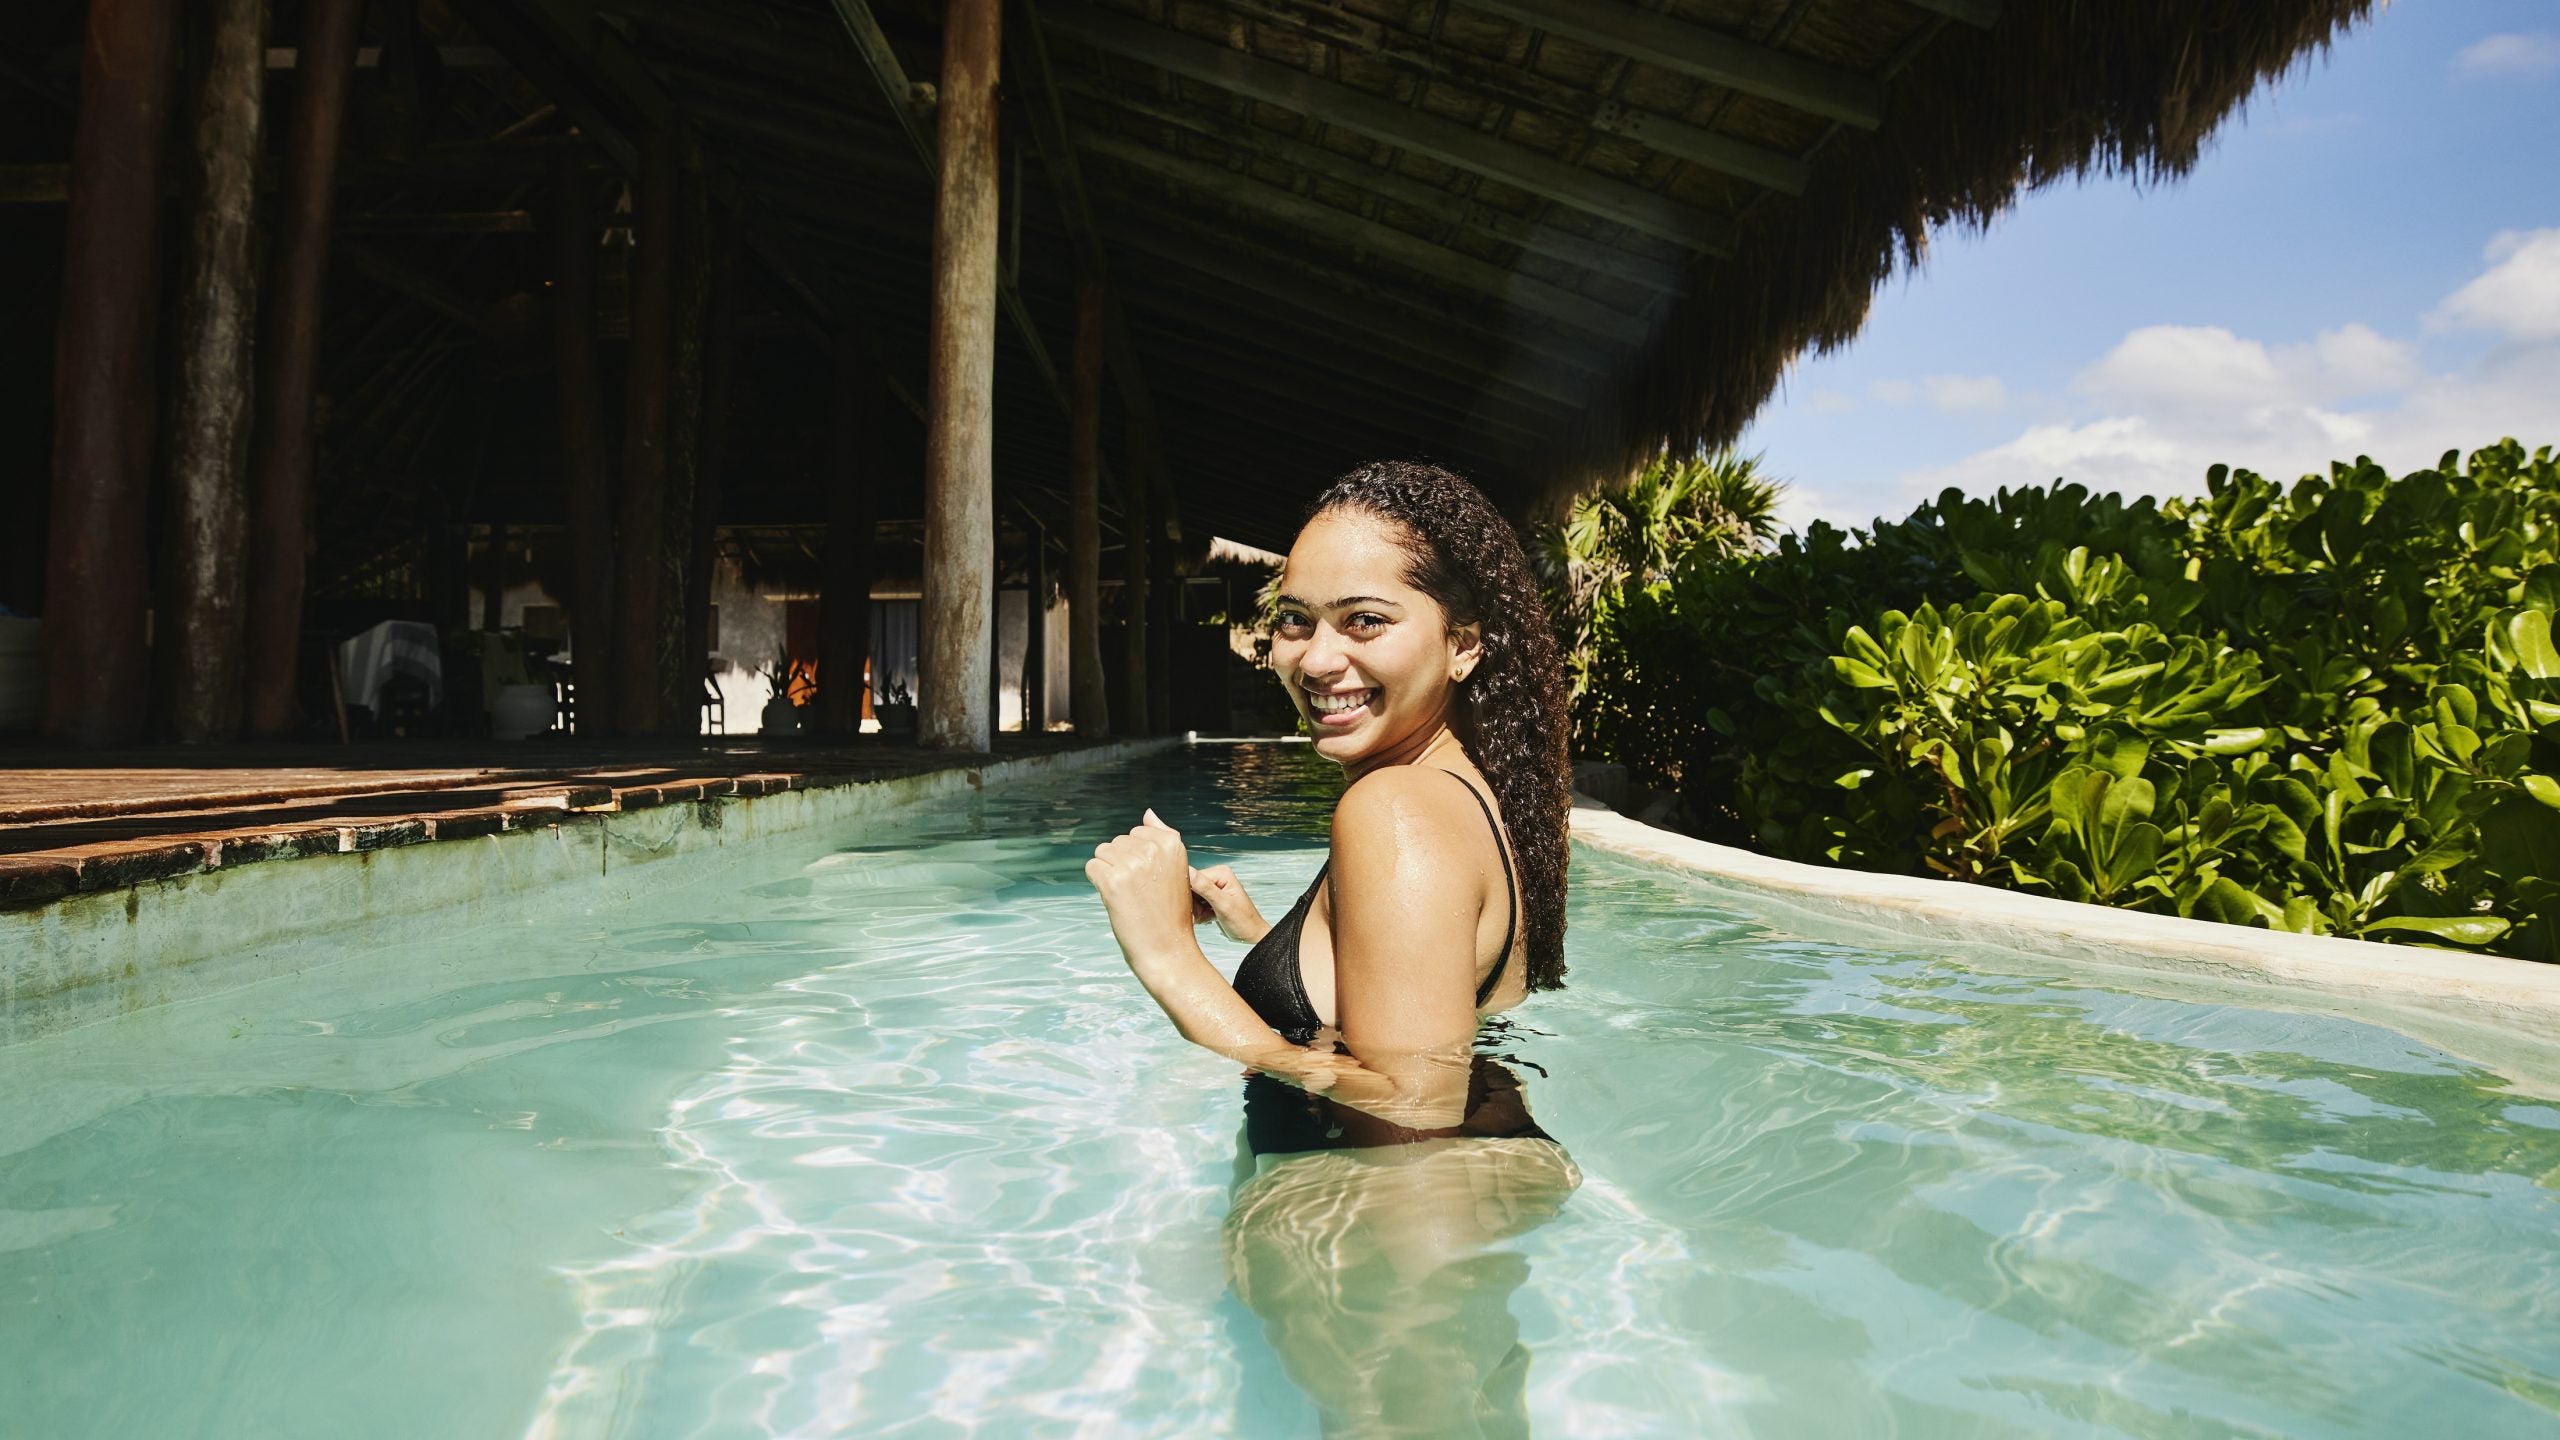 Wellness Retreats And Resorts Are Trending. But, Which Ones Offer Safe Spaces For Black Women?